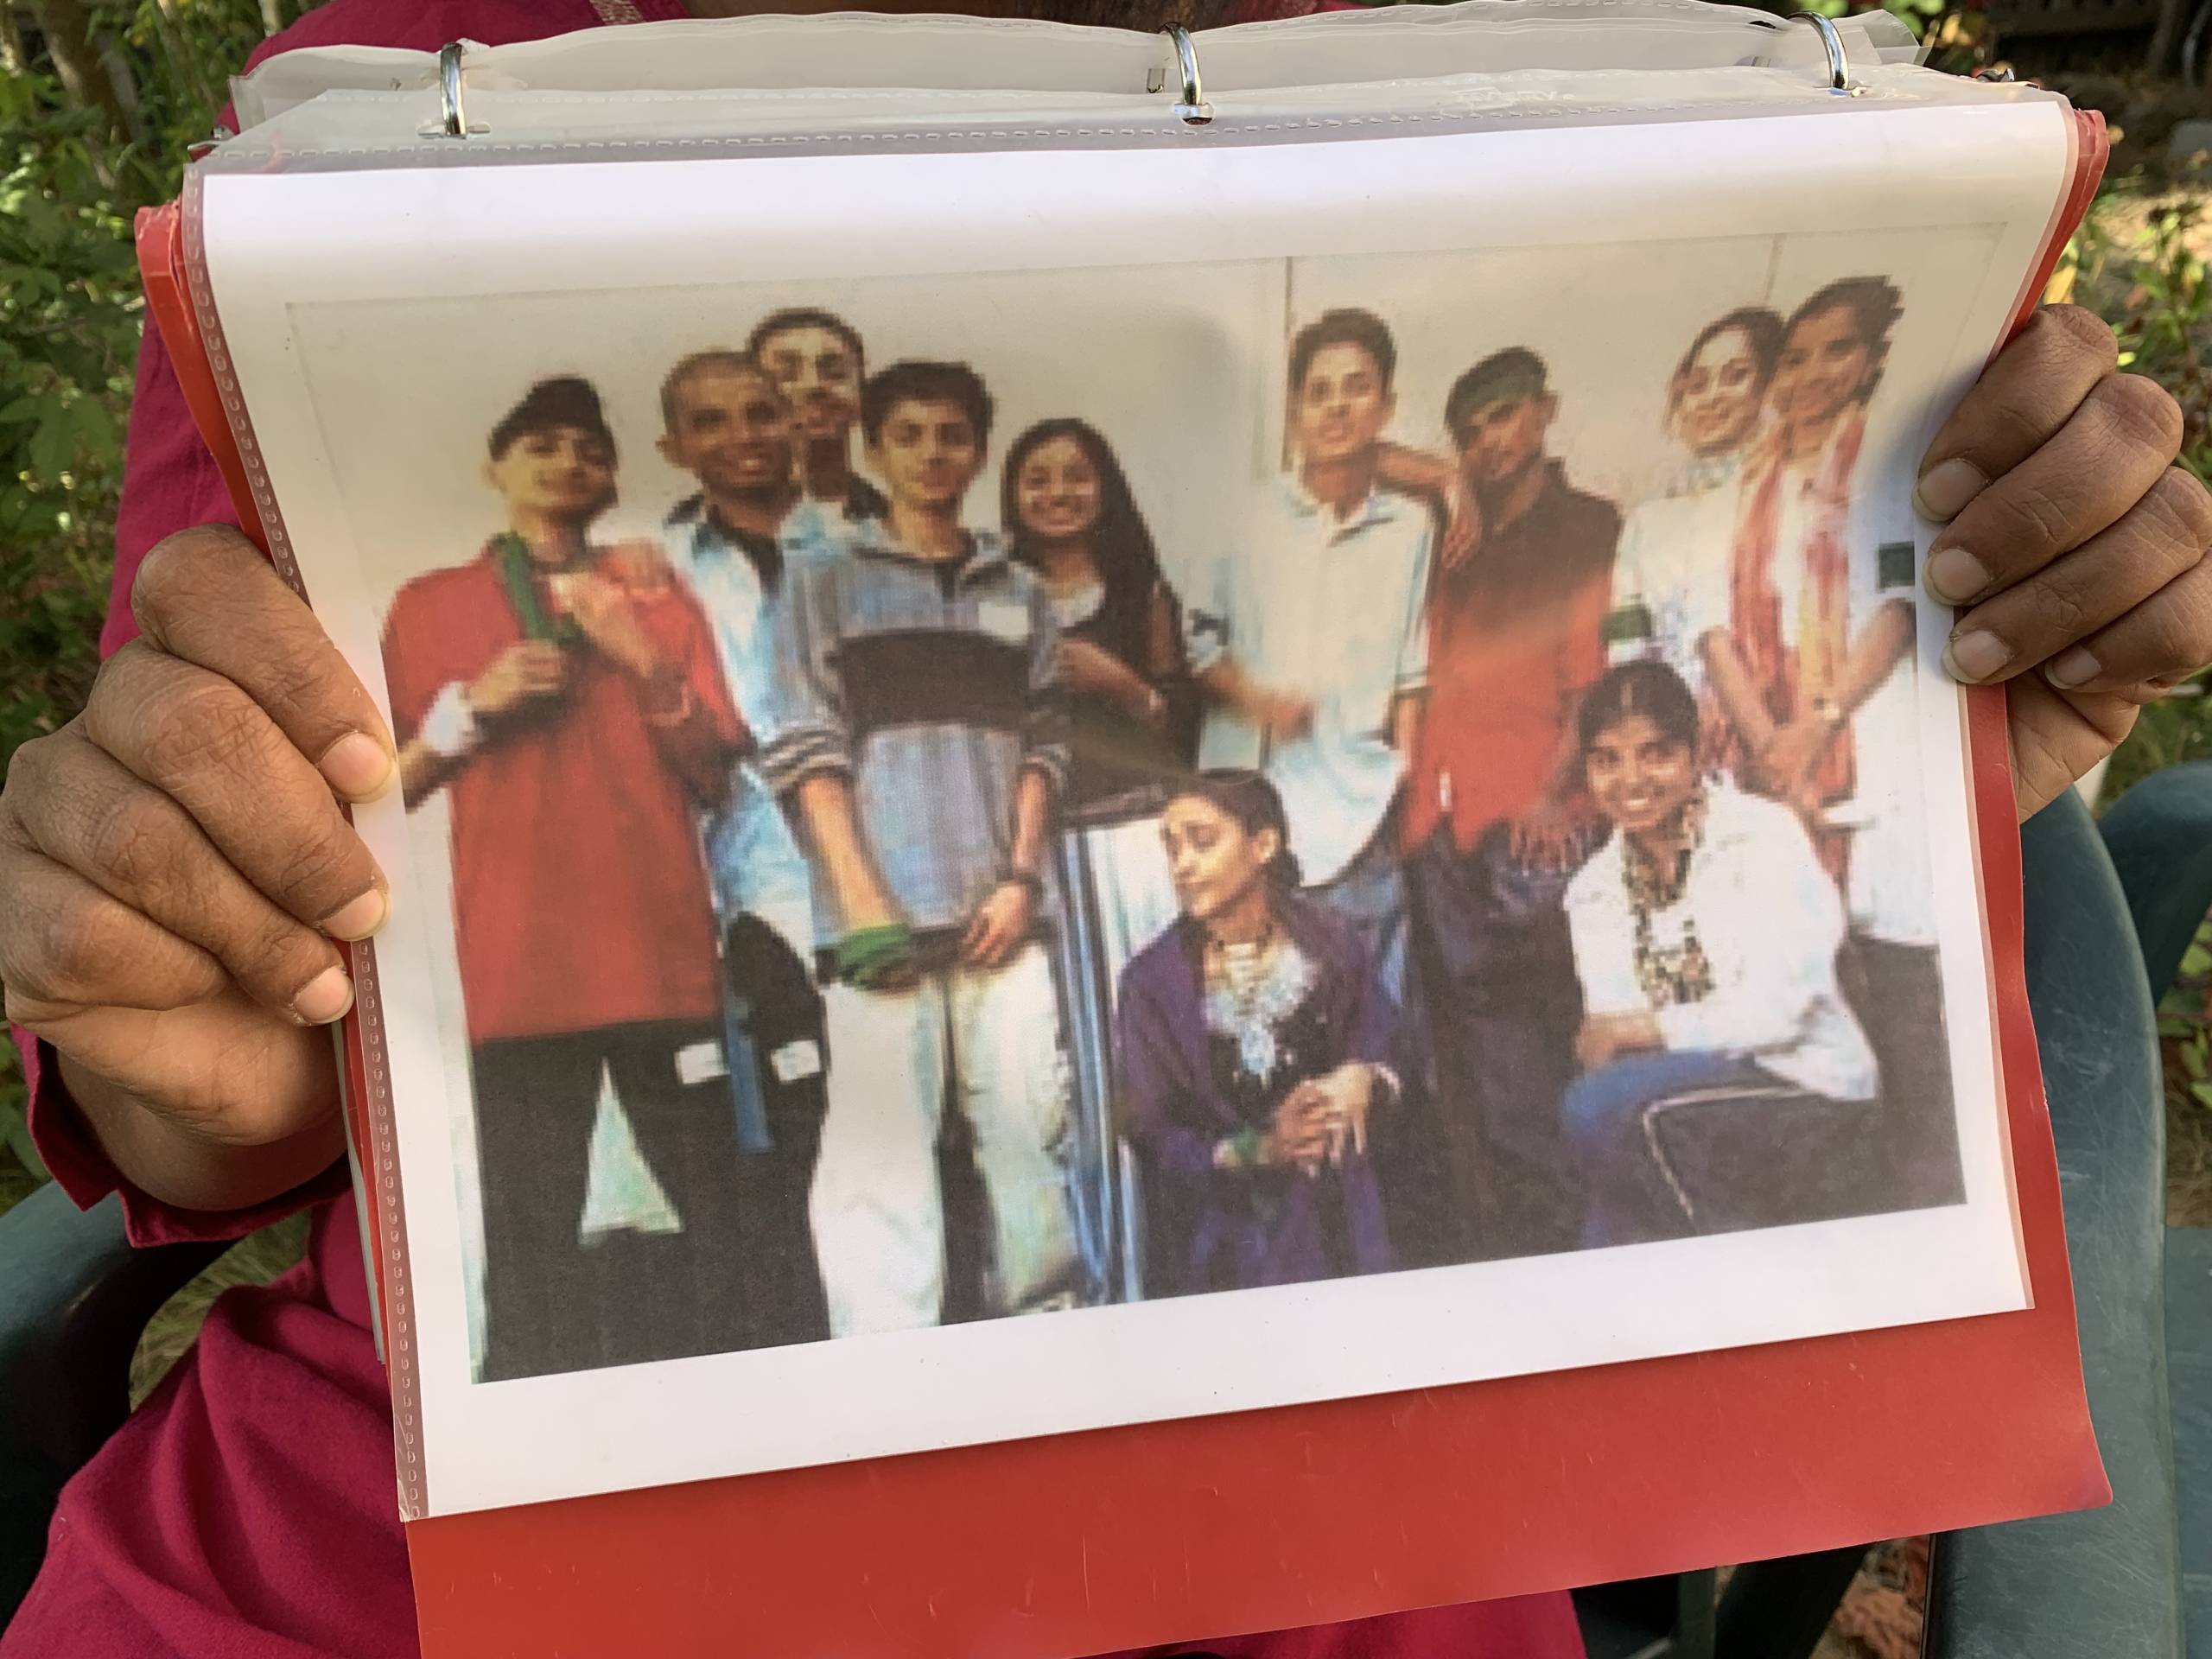 Two hands hold up a picture in a binder of a group of smiling teenagers.